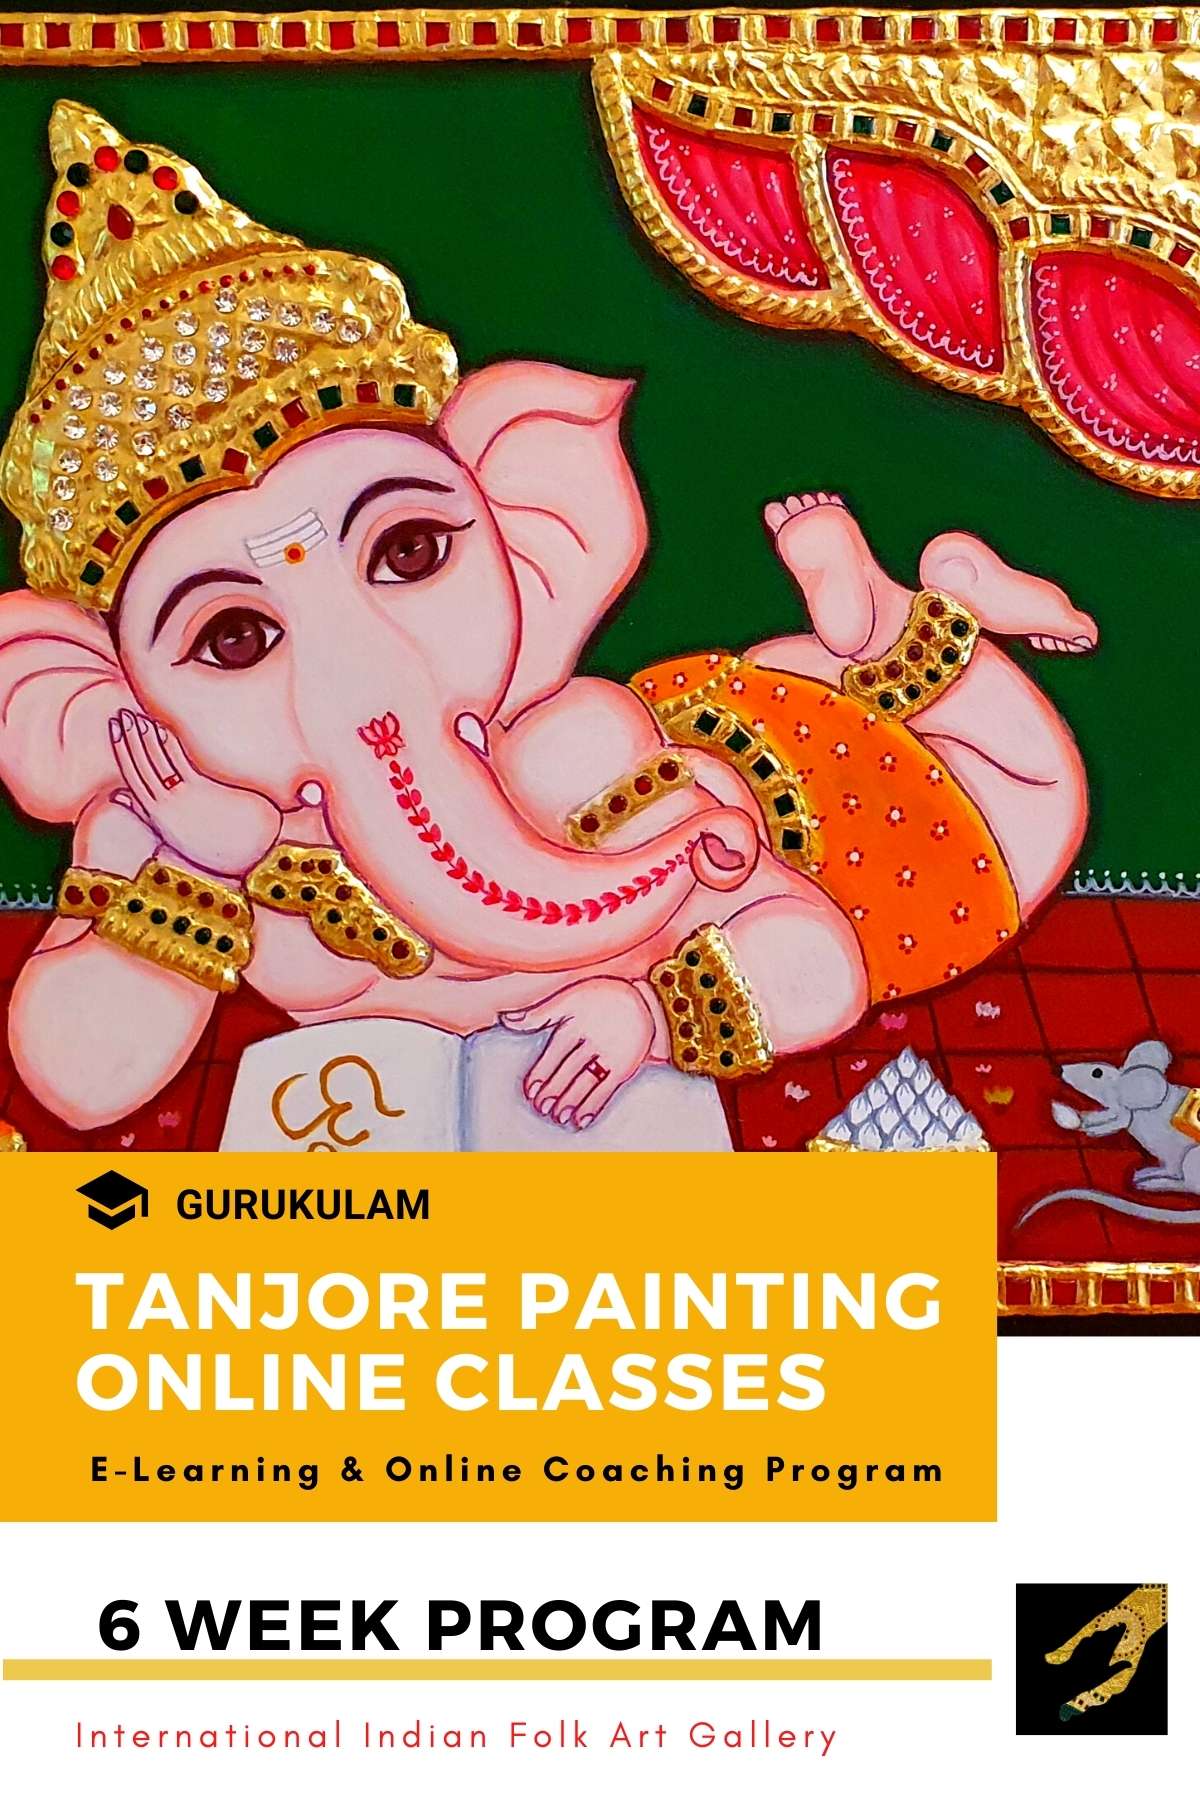 TP03: “The Old Way” of Tanjore Painting – Beginners Course